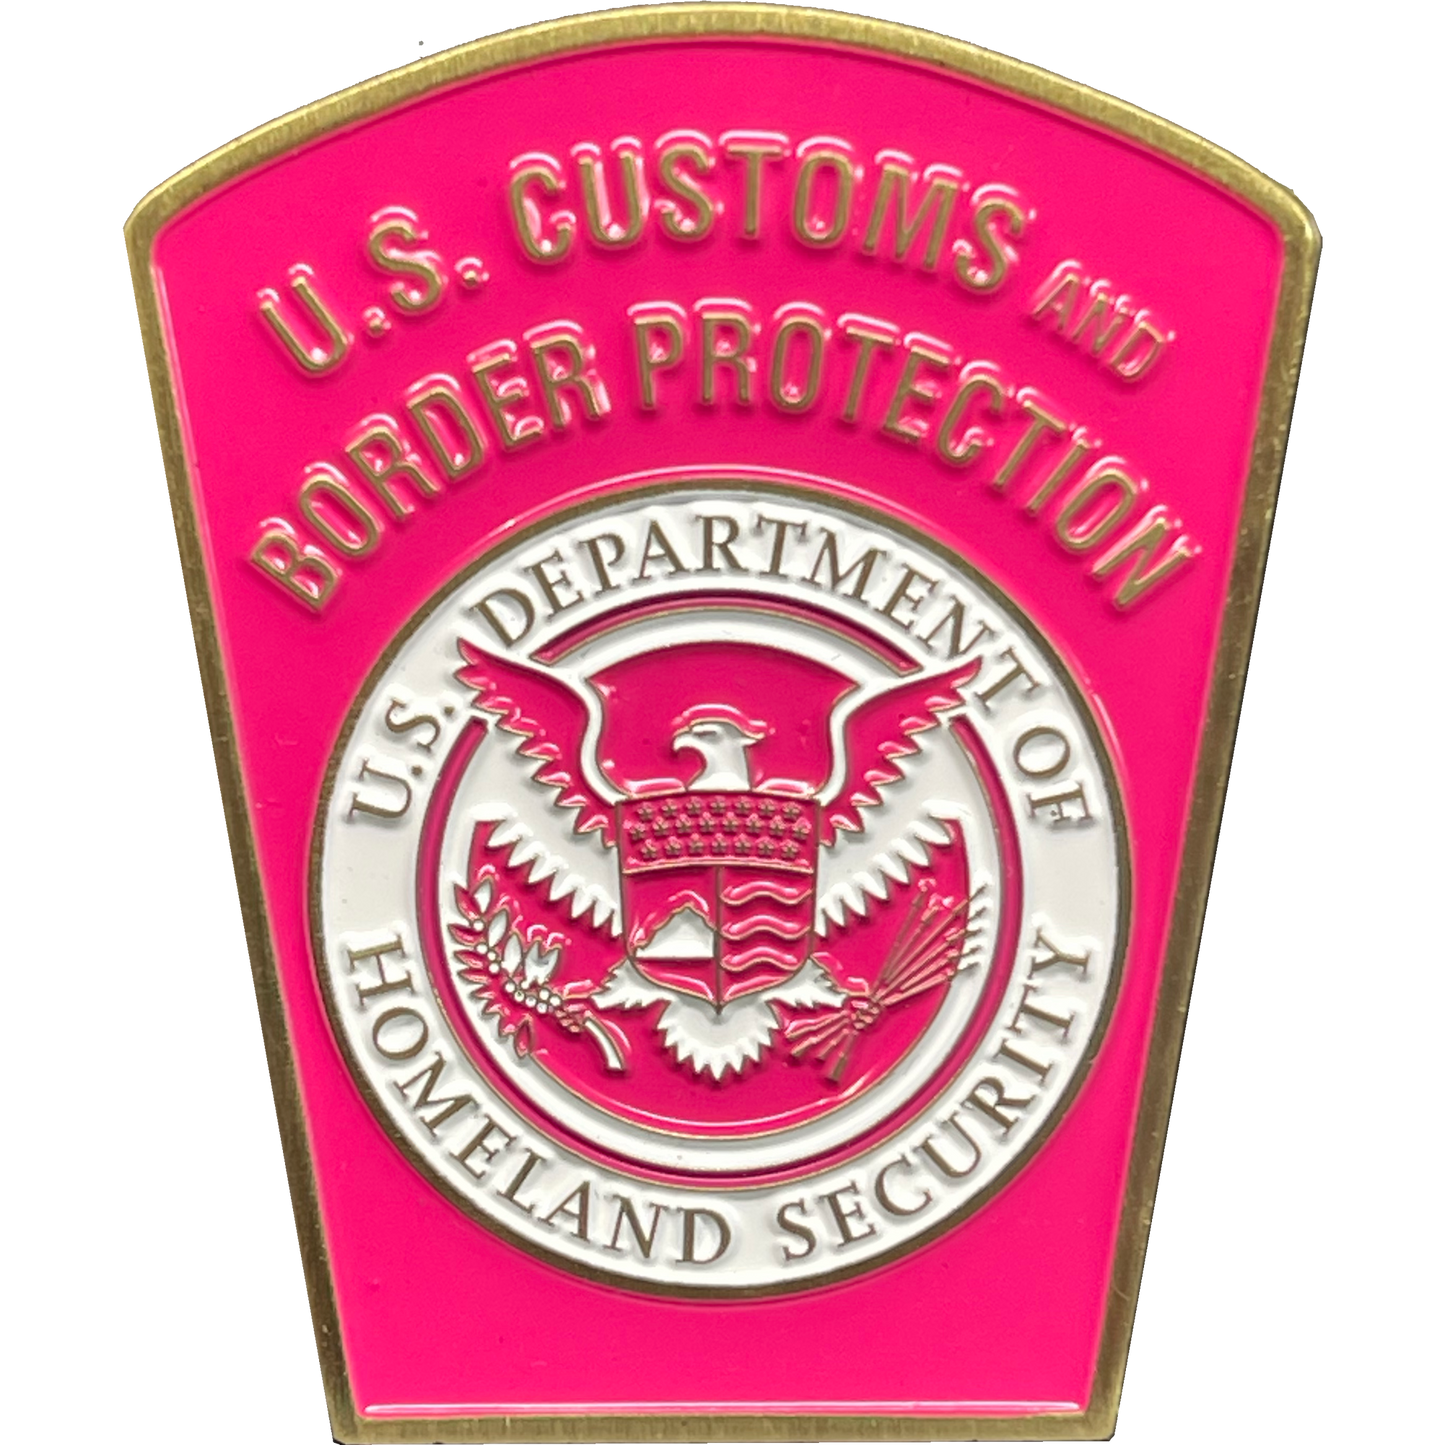 BL15-009 CBP Pink Border Patrol Field Operations Air and Marine Challenge Coin Breast Cancer Cancer Awareness